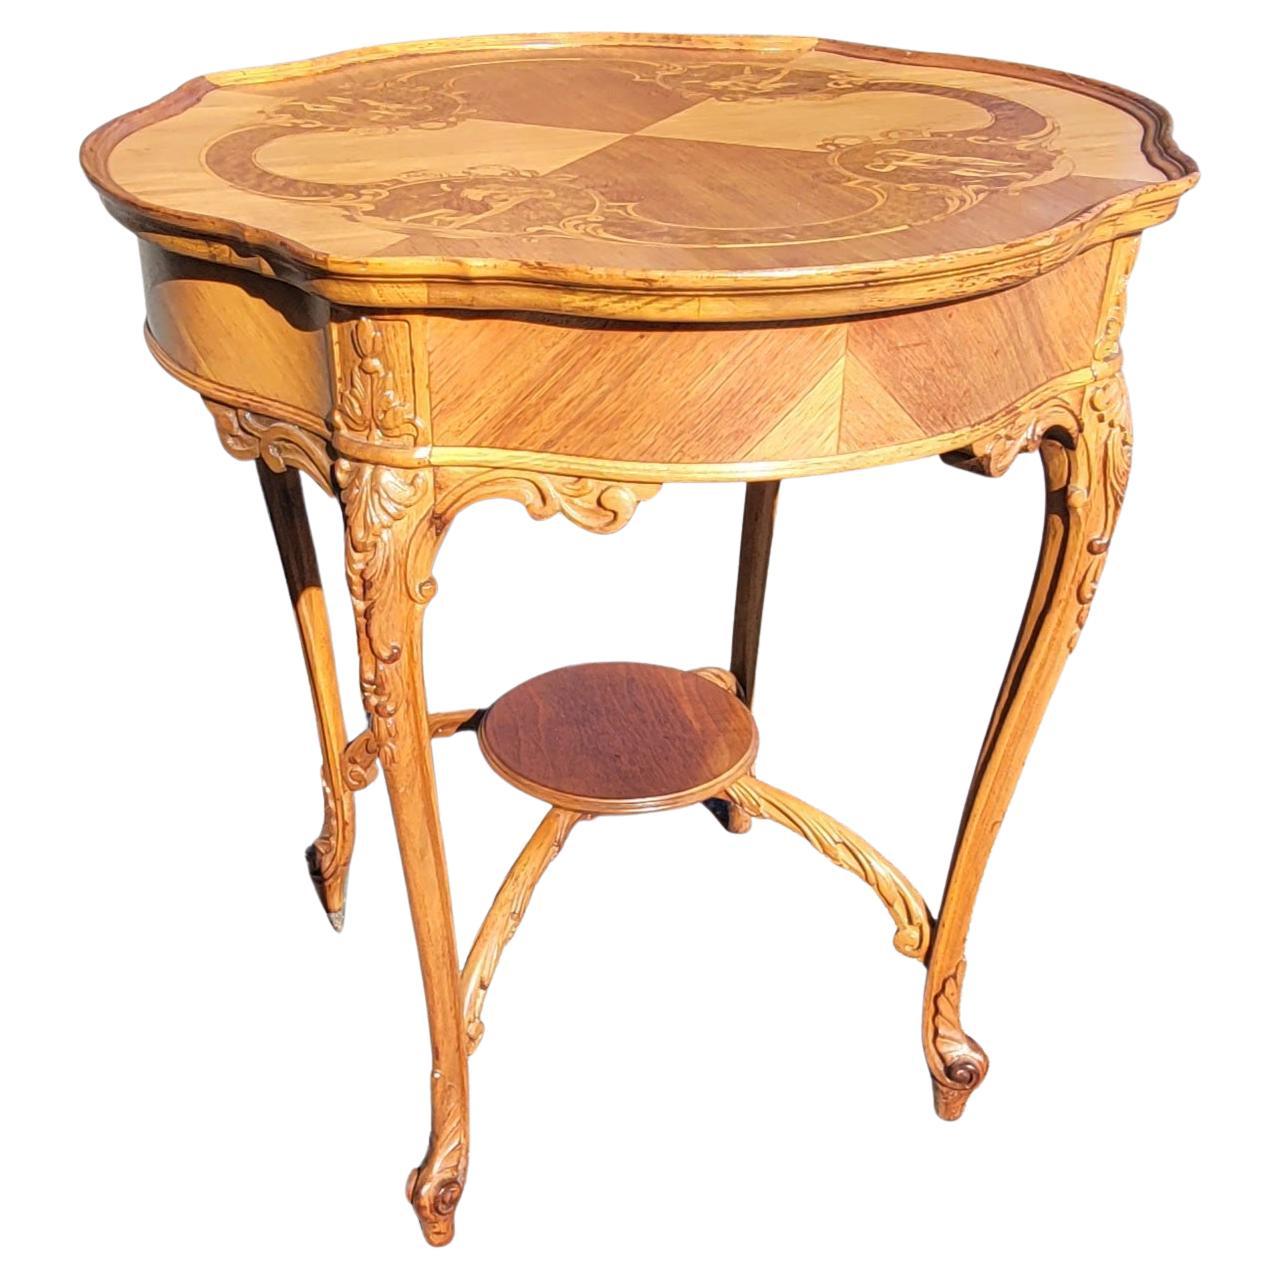 Louis XV style Marquetry and carved walnut and mahogany center table with stretcher for greater stability. Intricate marquetry works on top featuring 4 dancing couples individually designed and inlaid, apron and carvings on cabriole legs terminating